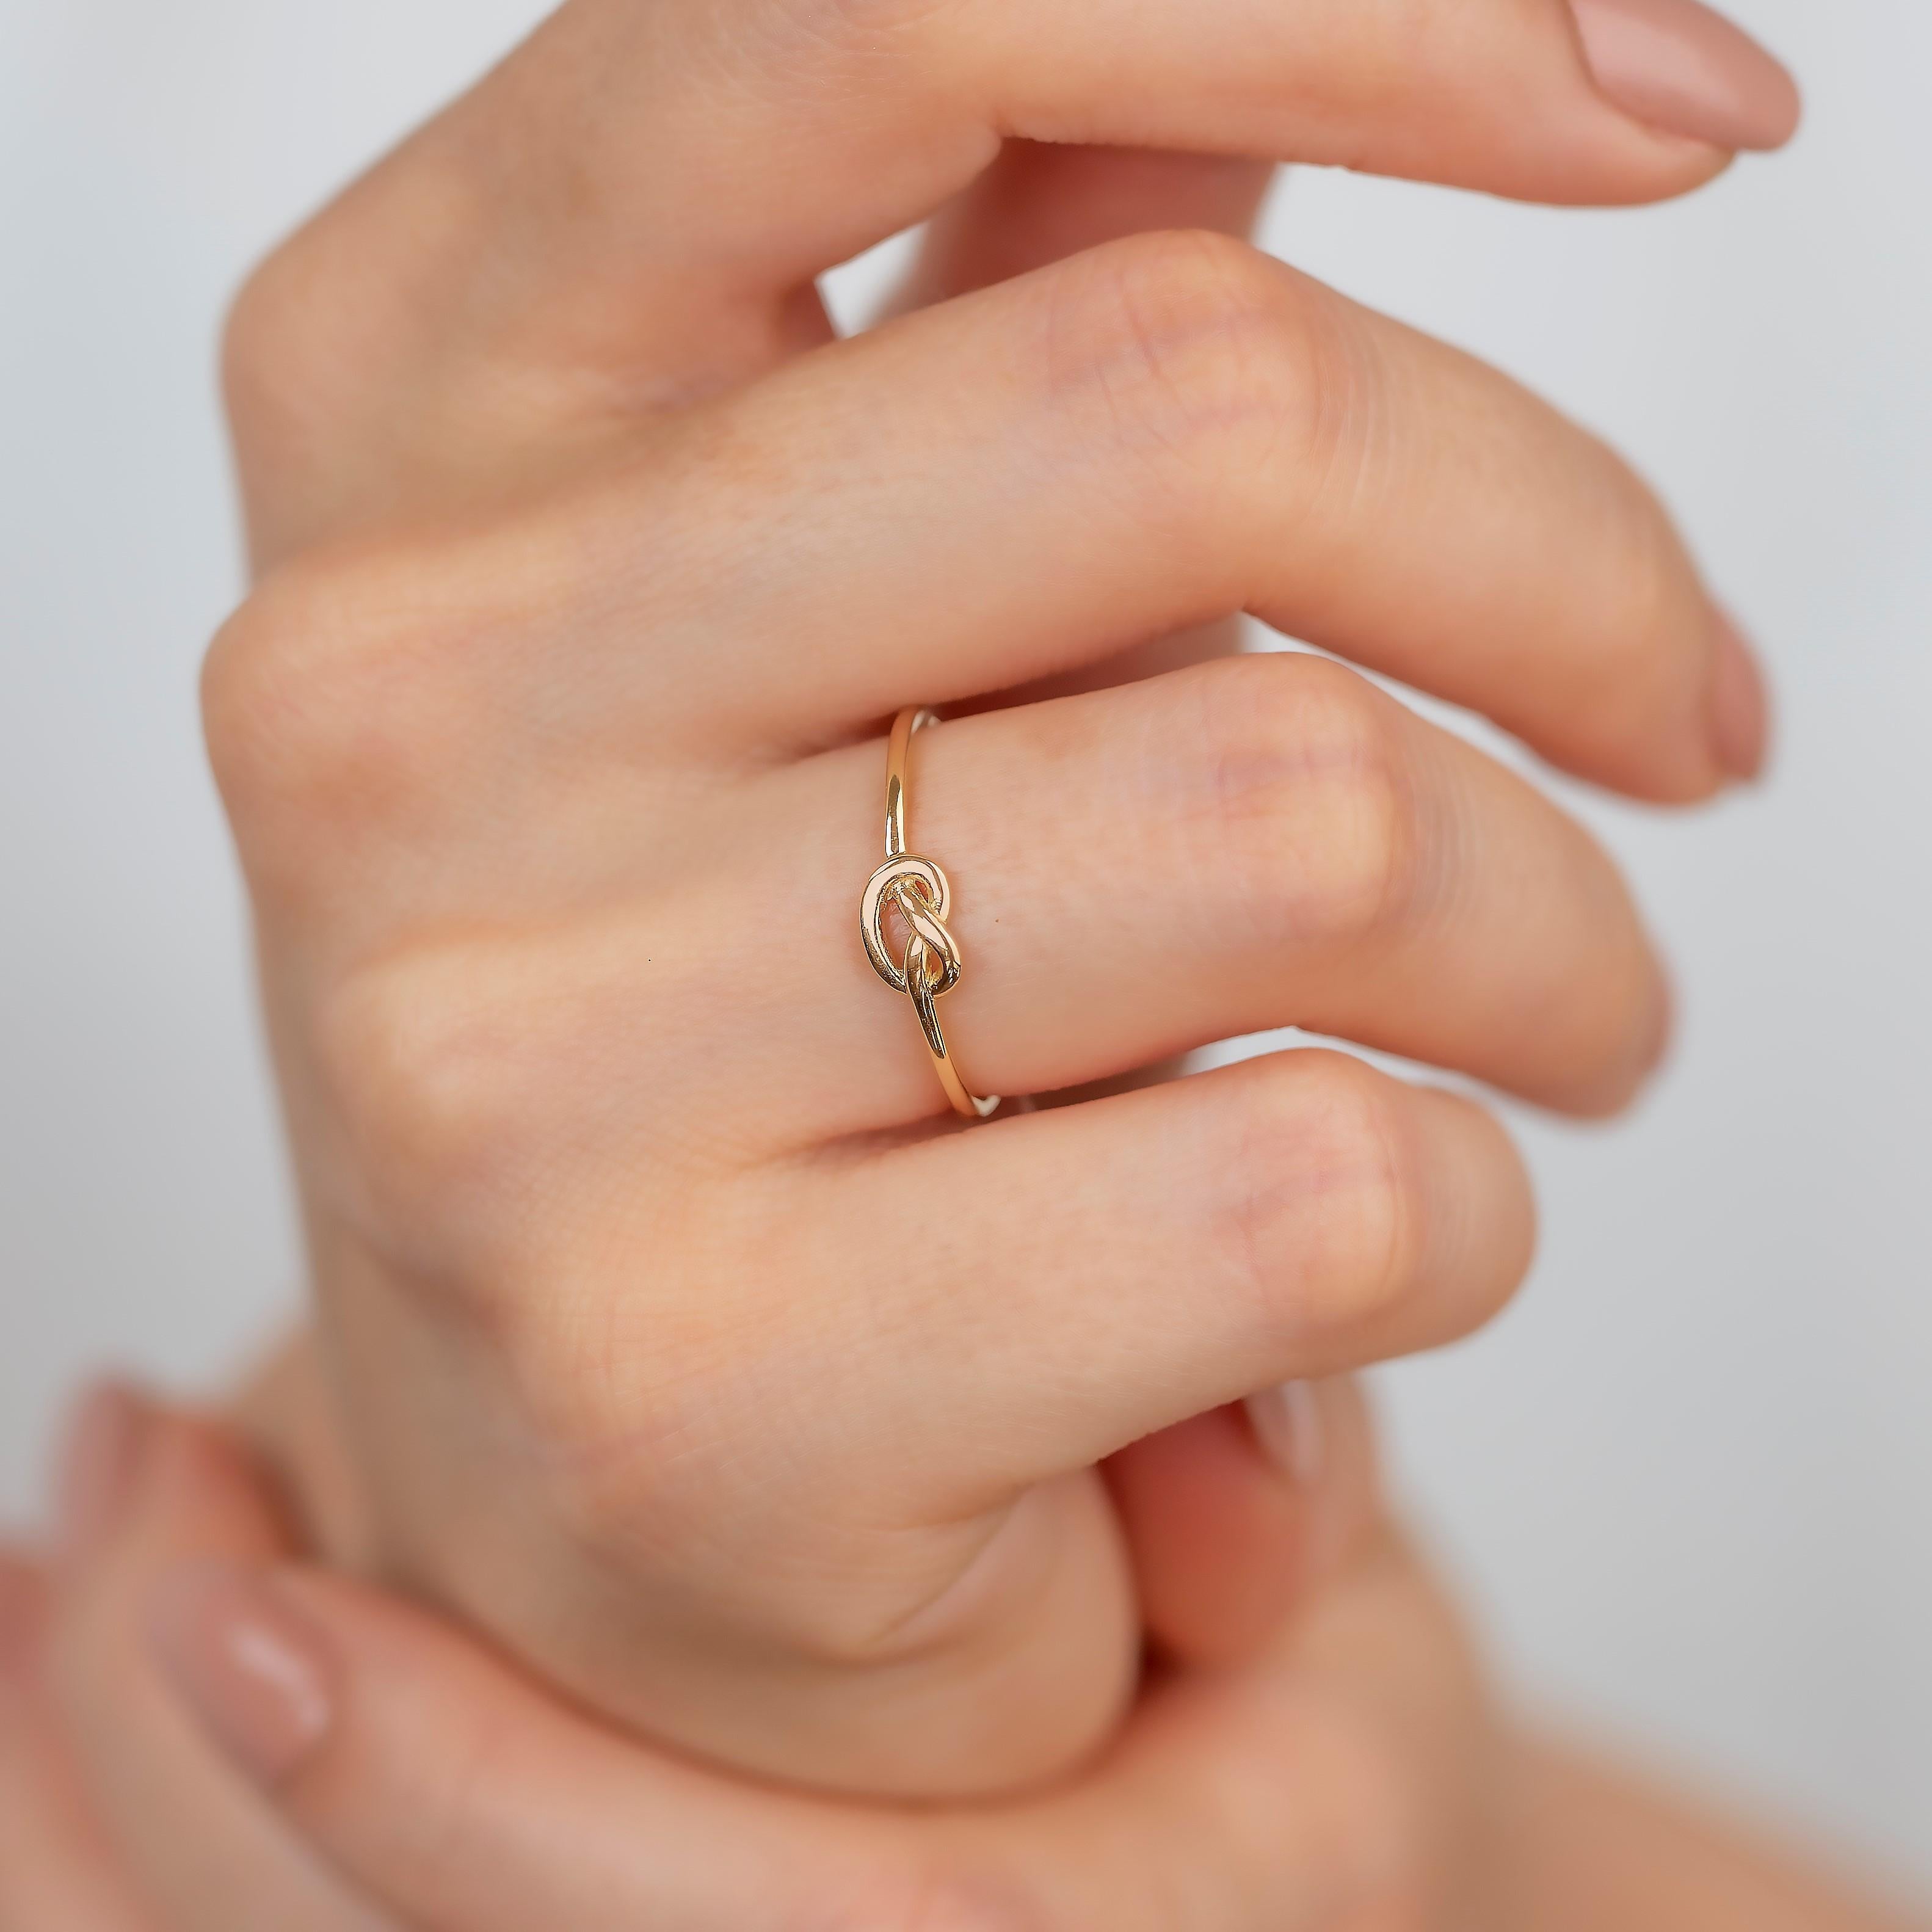 For Sale:  Gold Knot Ring, 14k Solid Gold, Dainty Ring, Minimalist Style Ring 2